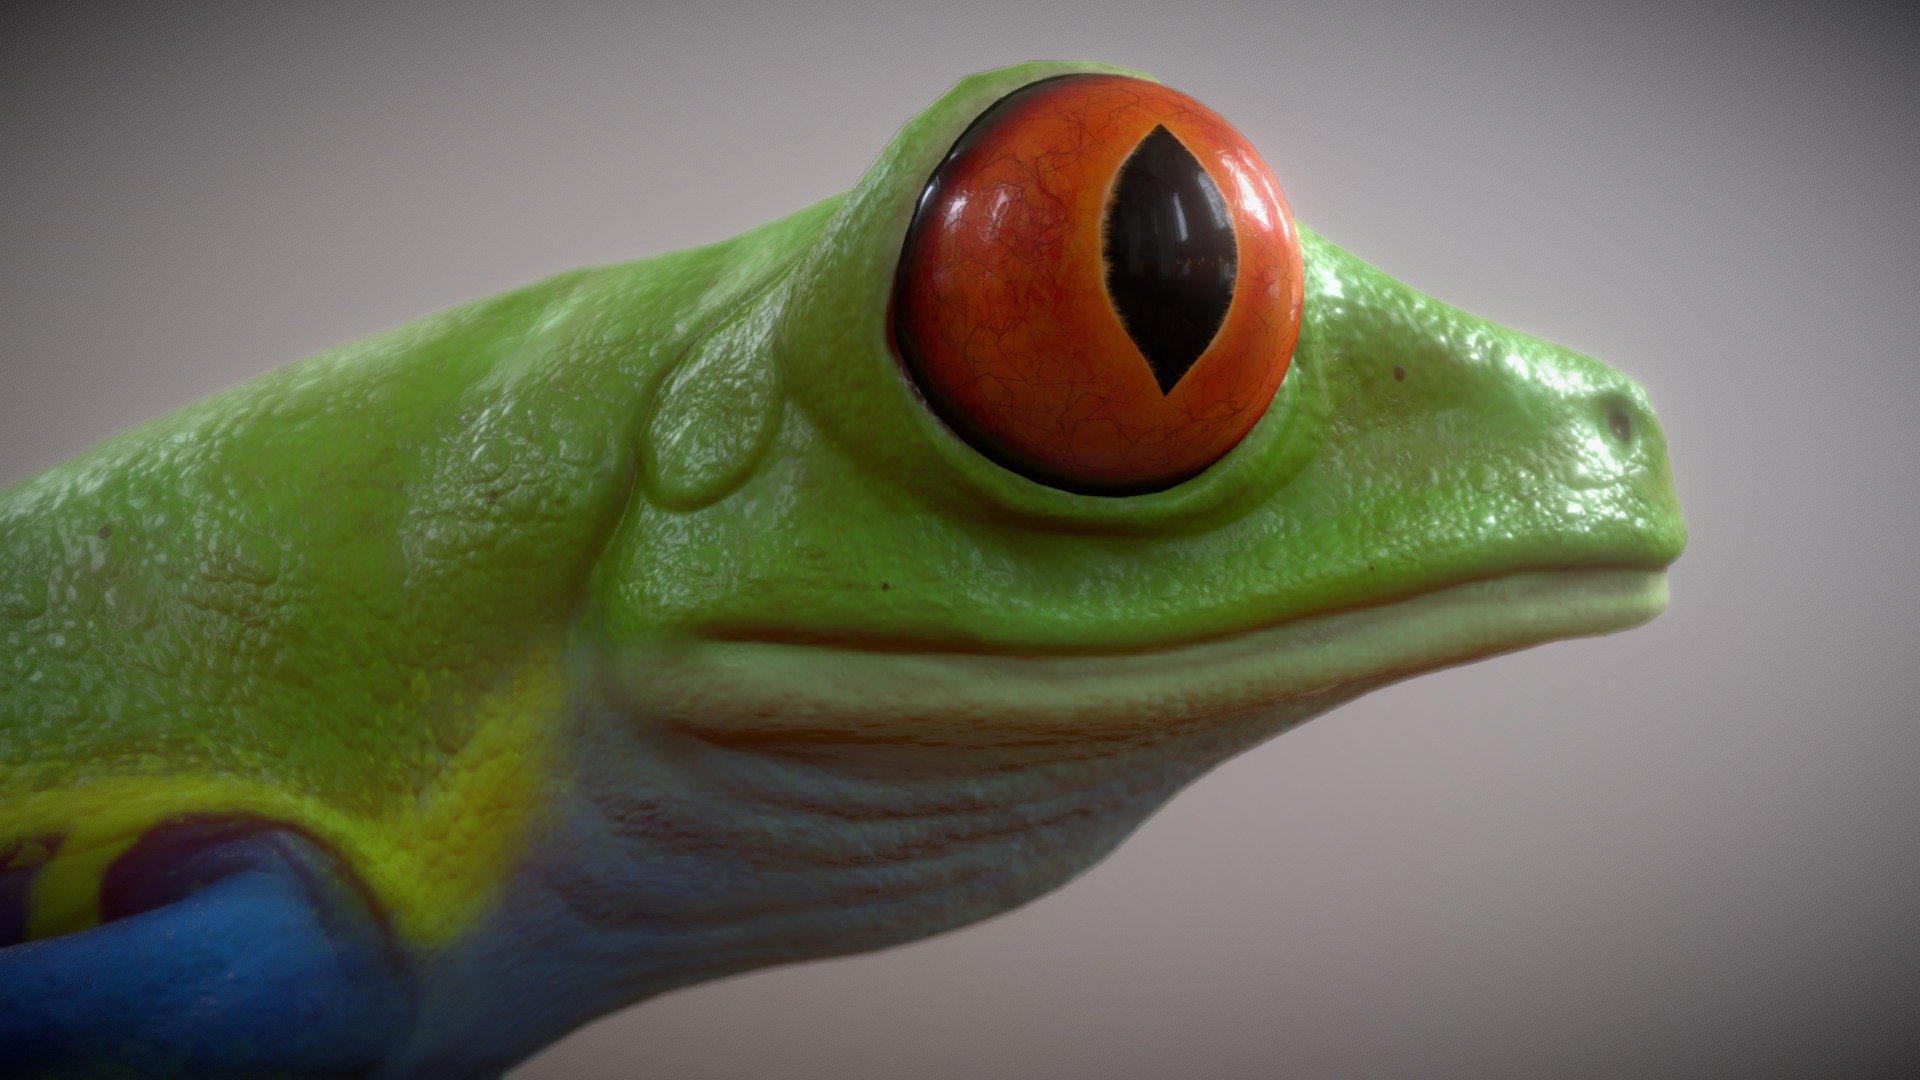 A Red-Eyed Tree Frog model I made!

This model includes:




The FBX file of the rigged model

5 animations

4K PBR Base, Roughness, Metallic and Normal map textures

A .Zip file with the PBR textures, FBX model and the.Blend file

The model does NOT have a modeled mouth that can open and close.




Sculpted and retopo'd in ZBrush

Textured in Substance 3D Painter

Rigged and animated in Blender
 - Animated Red-Eyed Tree Frog - Buy Royalty Free 3D model by Zerindo 3d model